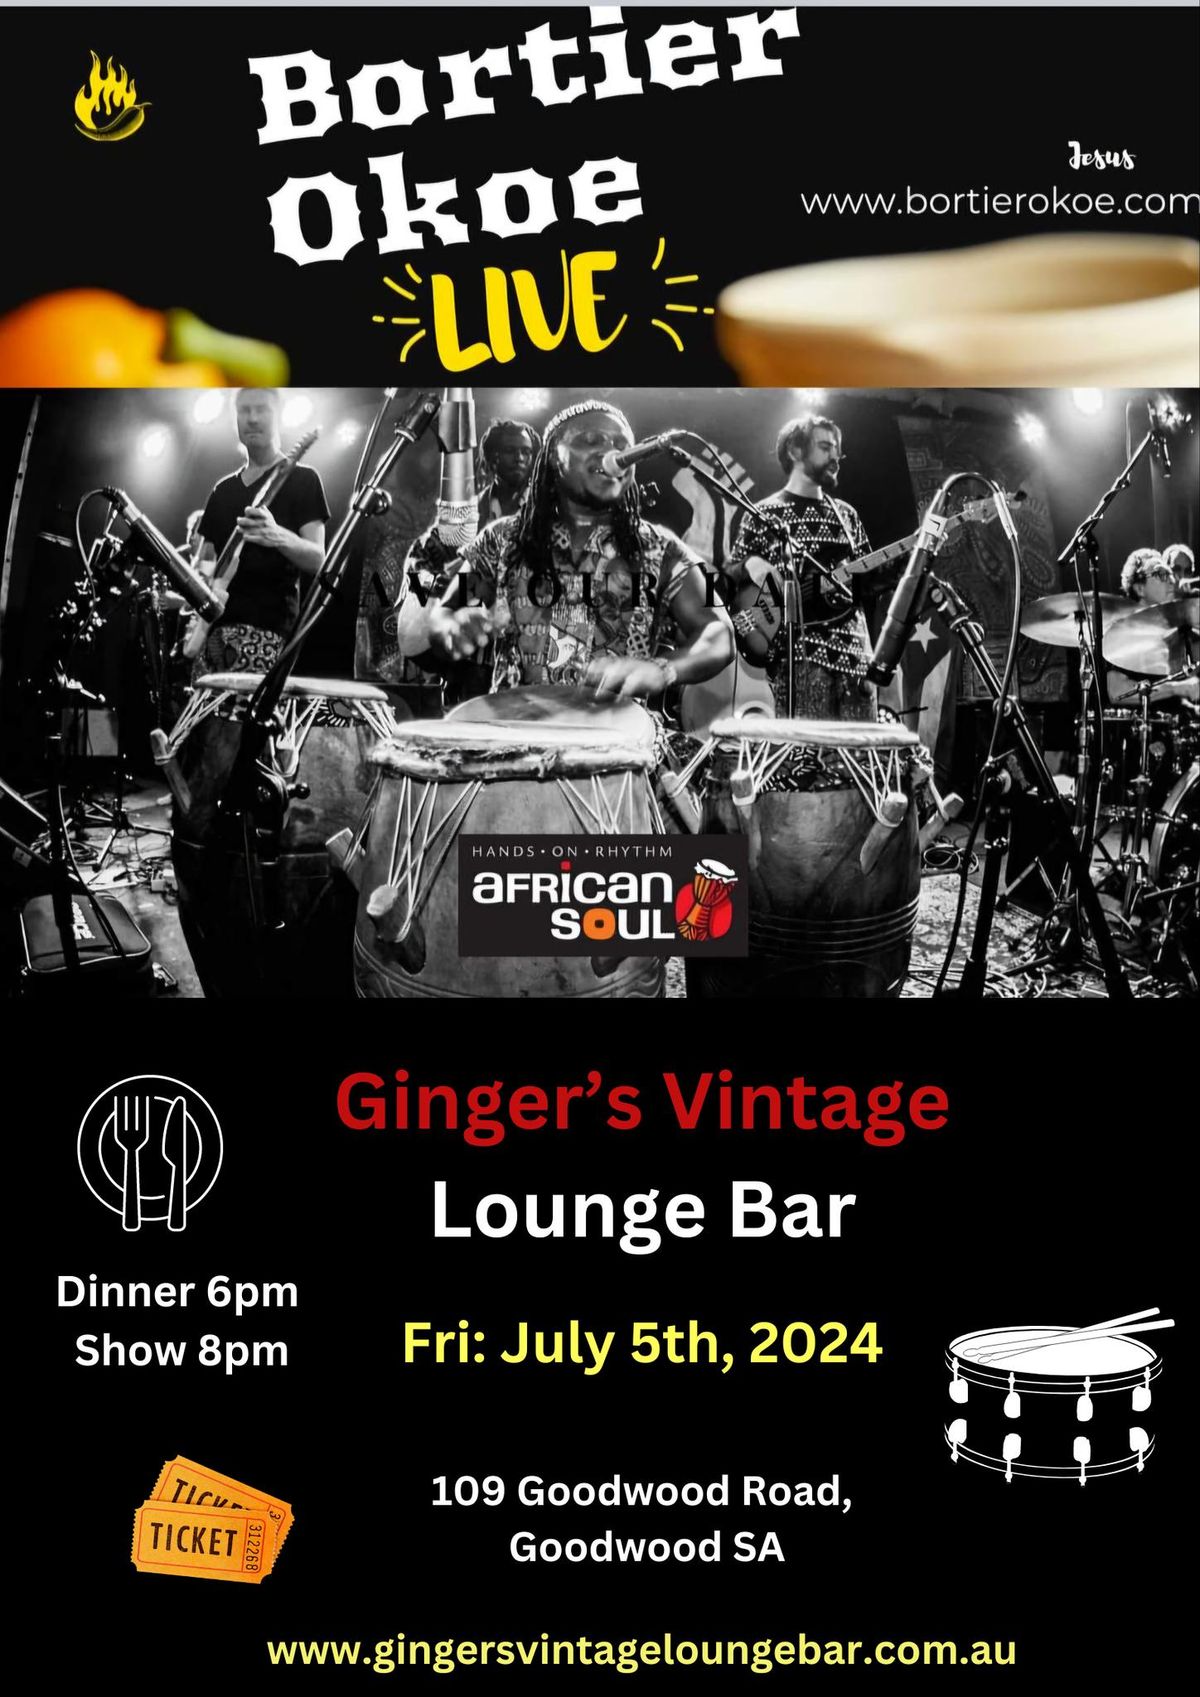 Bortier Okoe Live at the Gingers Vintage Lounge Bar